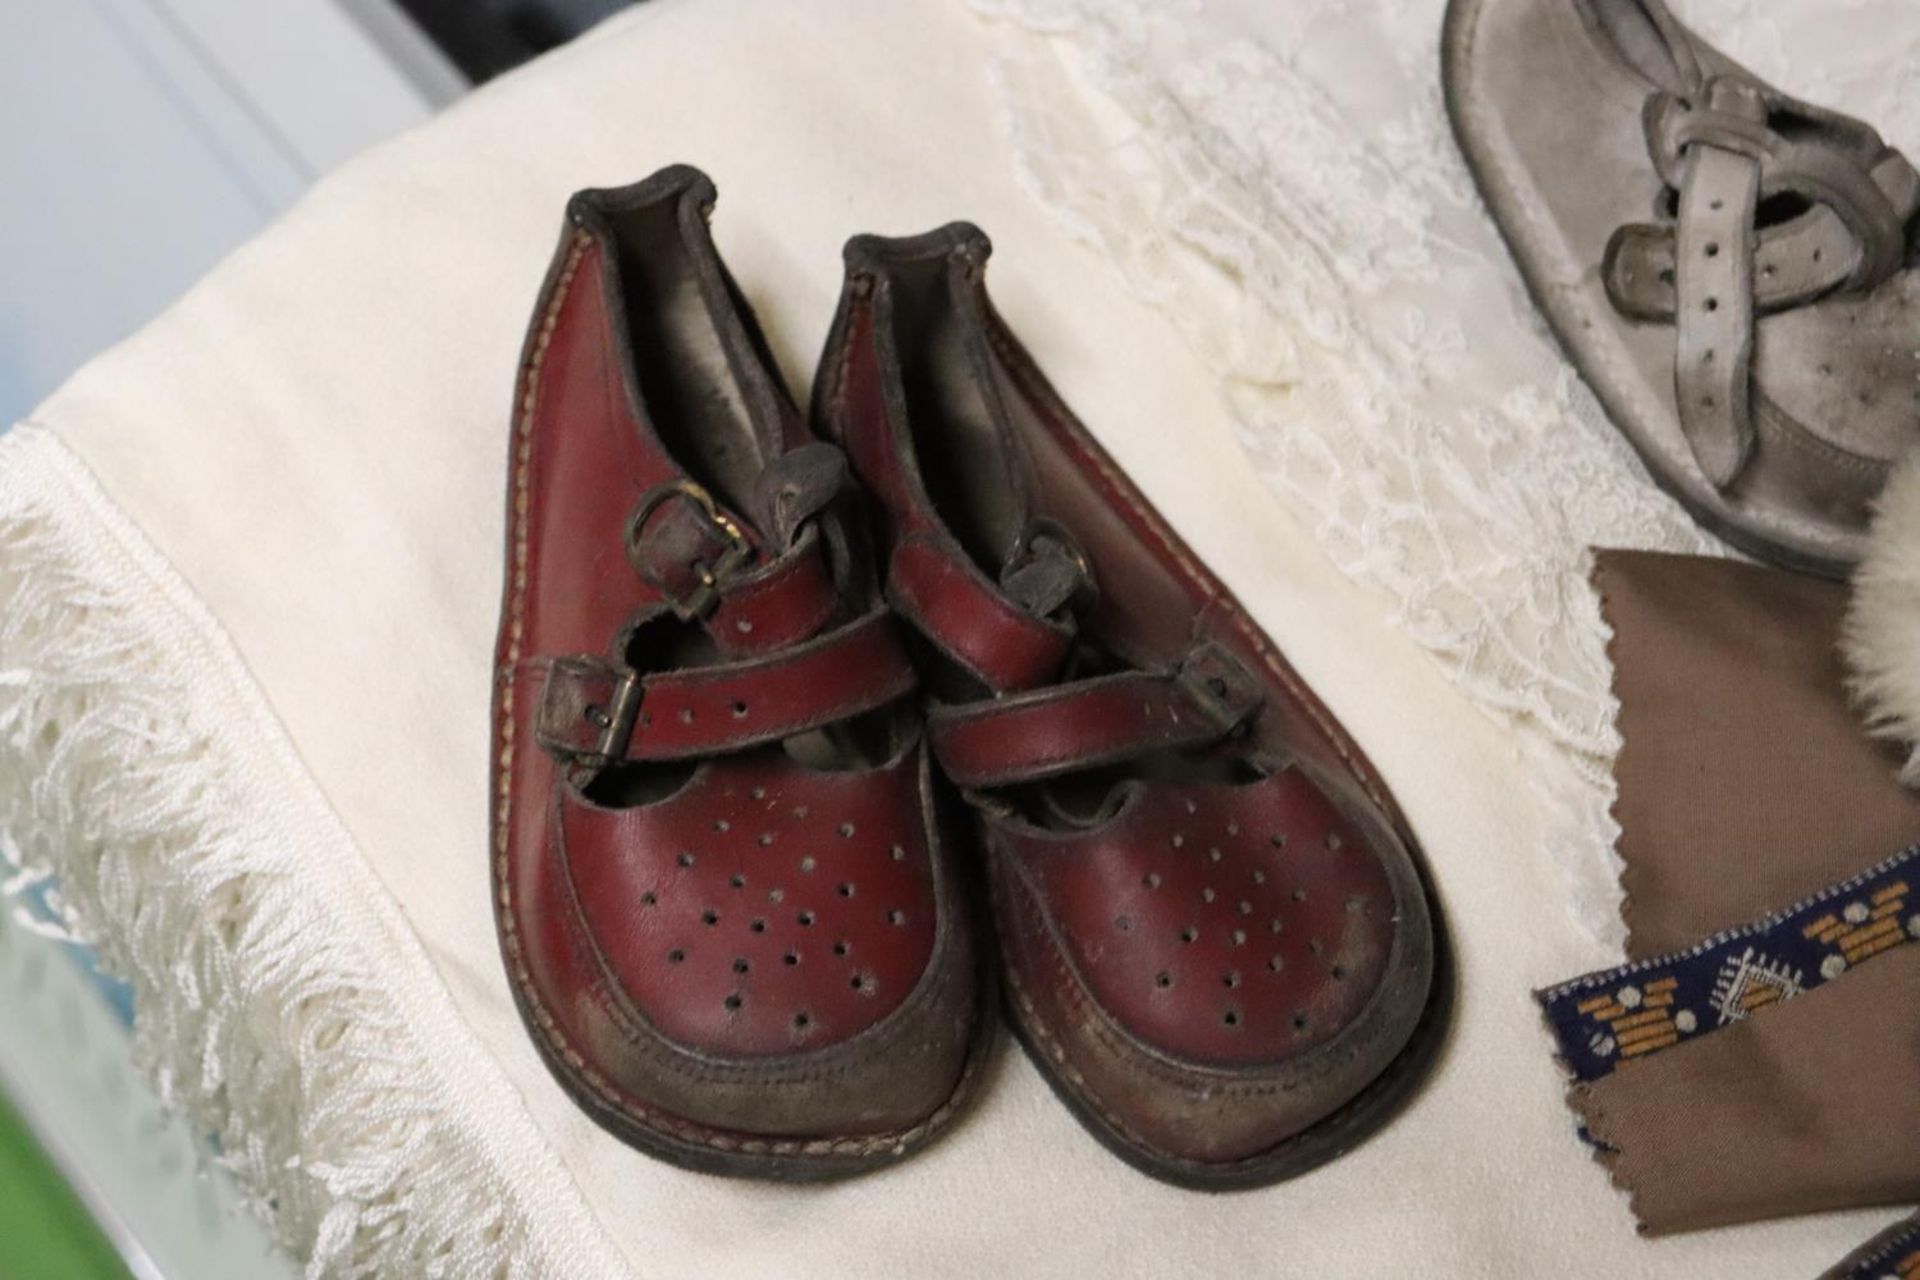 A QUANTITY OF VINTAGE CHILDREN'S CLOTHES AND SHOES - Image 2 of 6